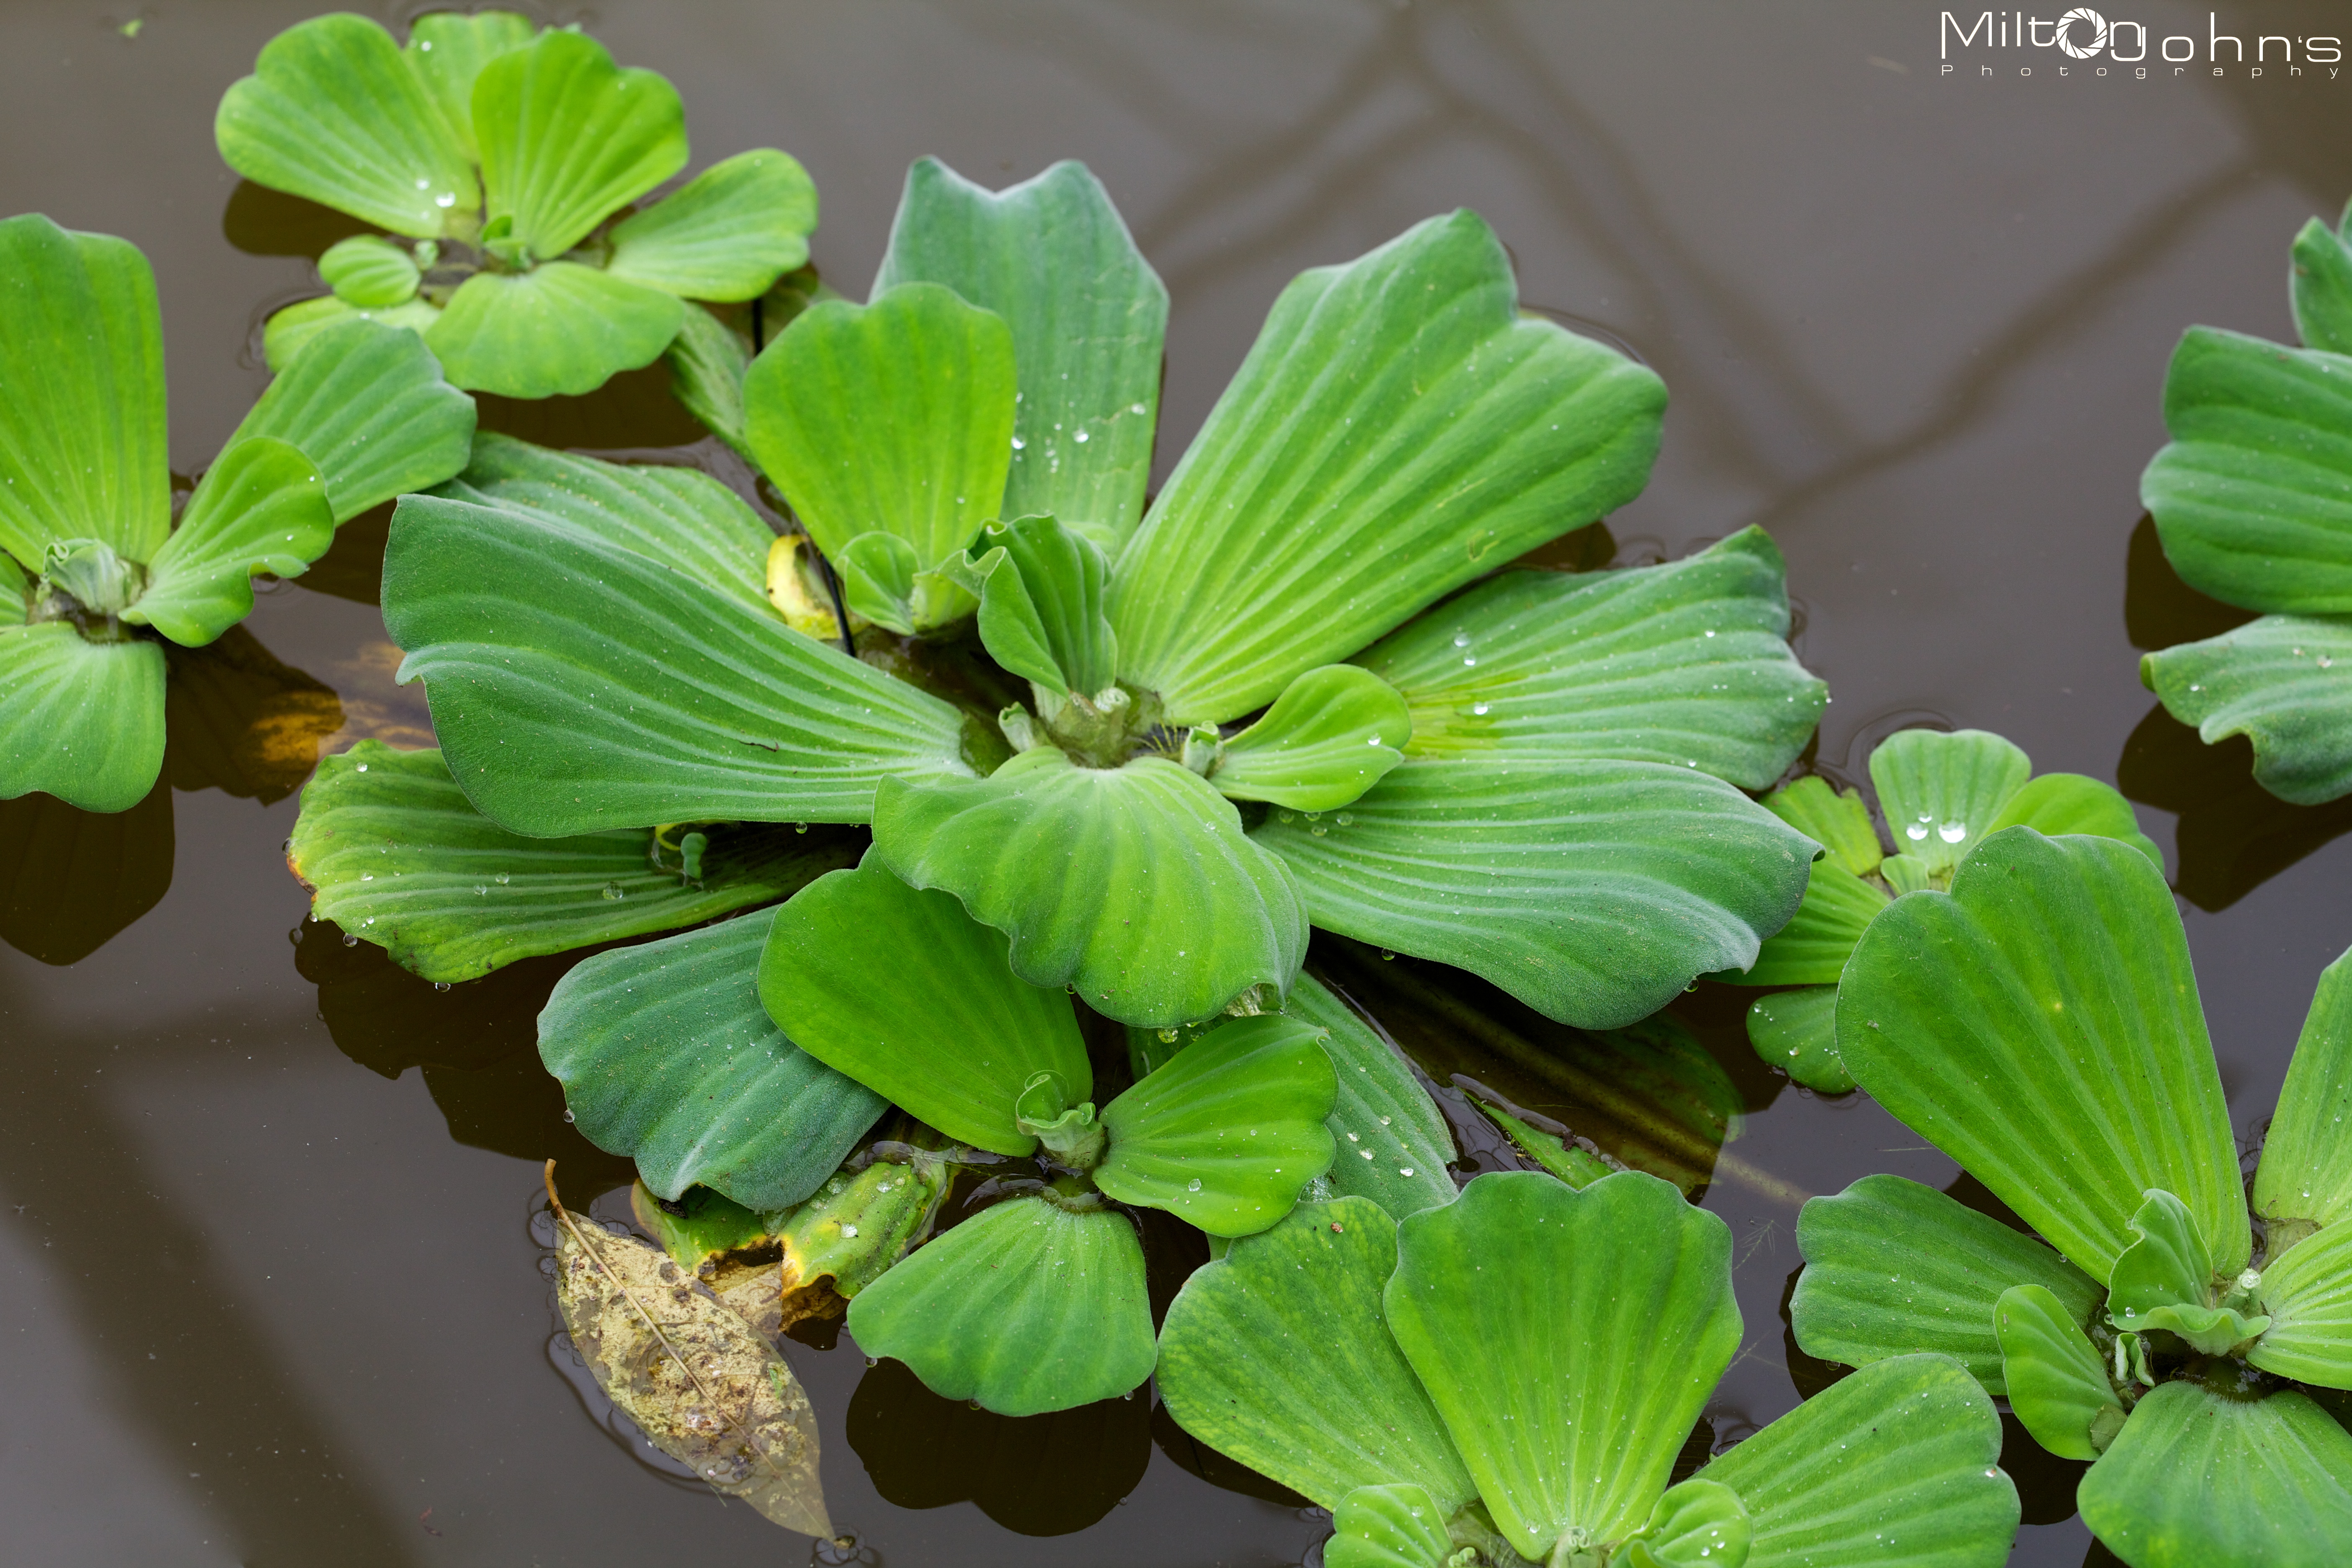 Water plants – MiltonJohns Photography